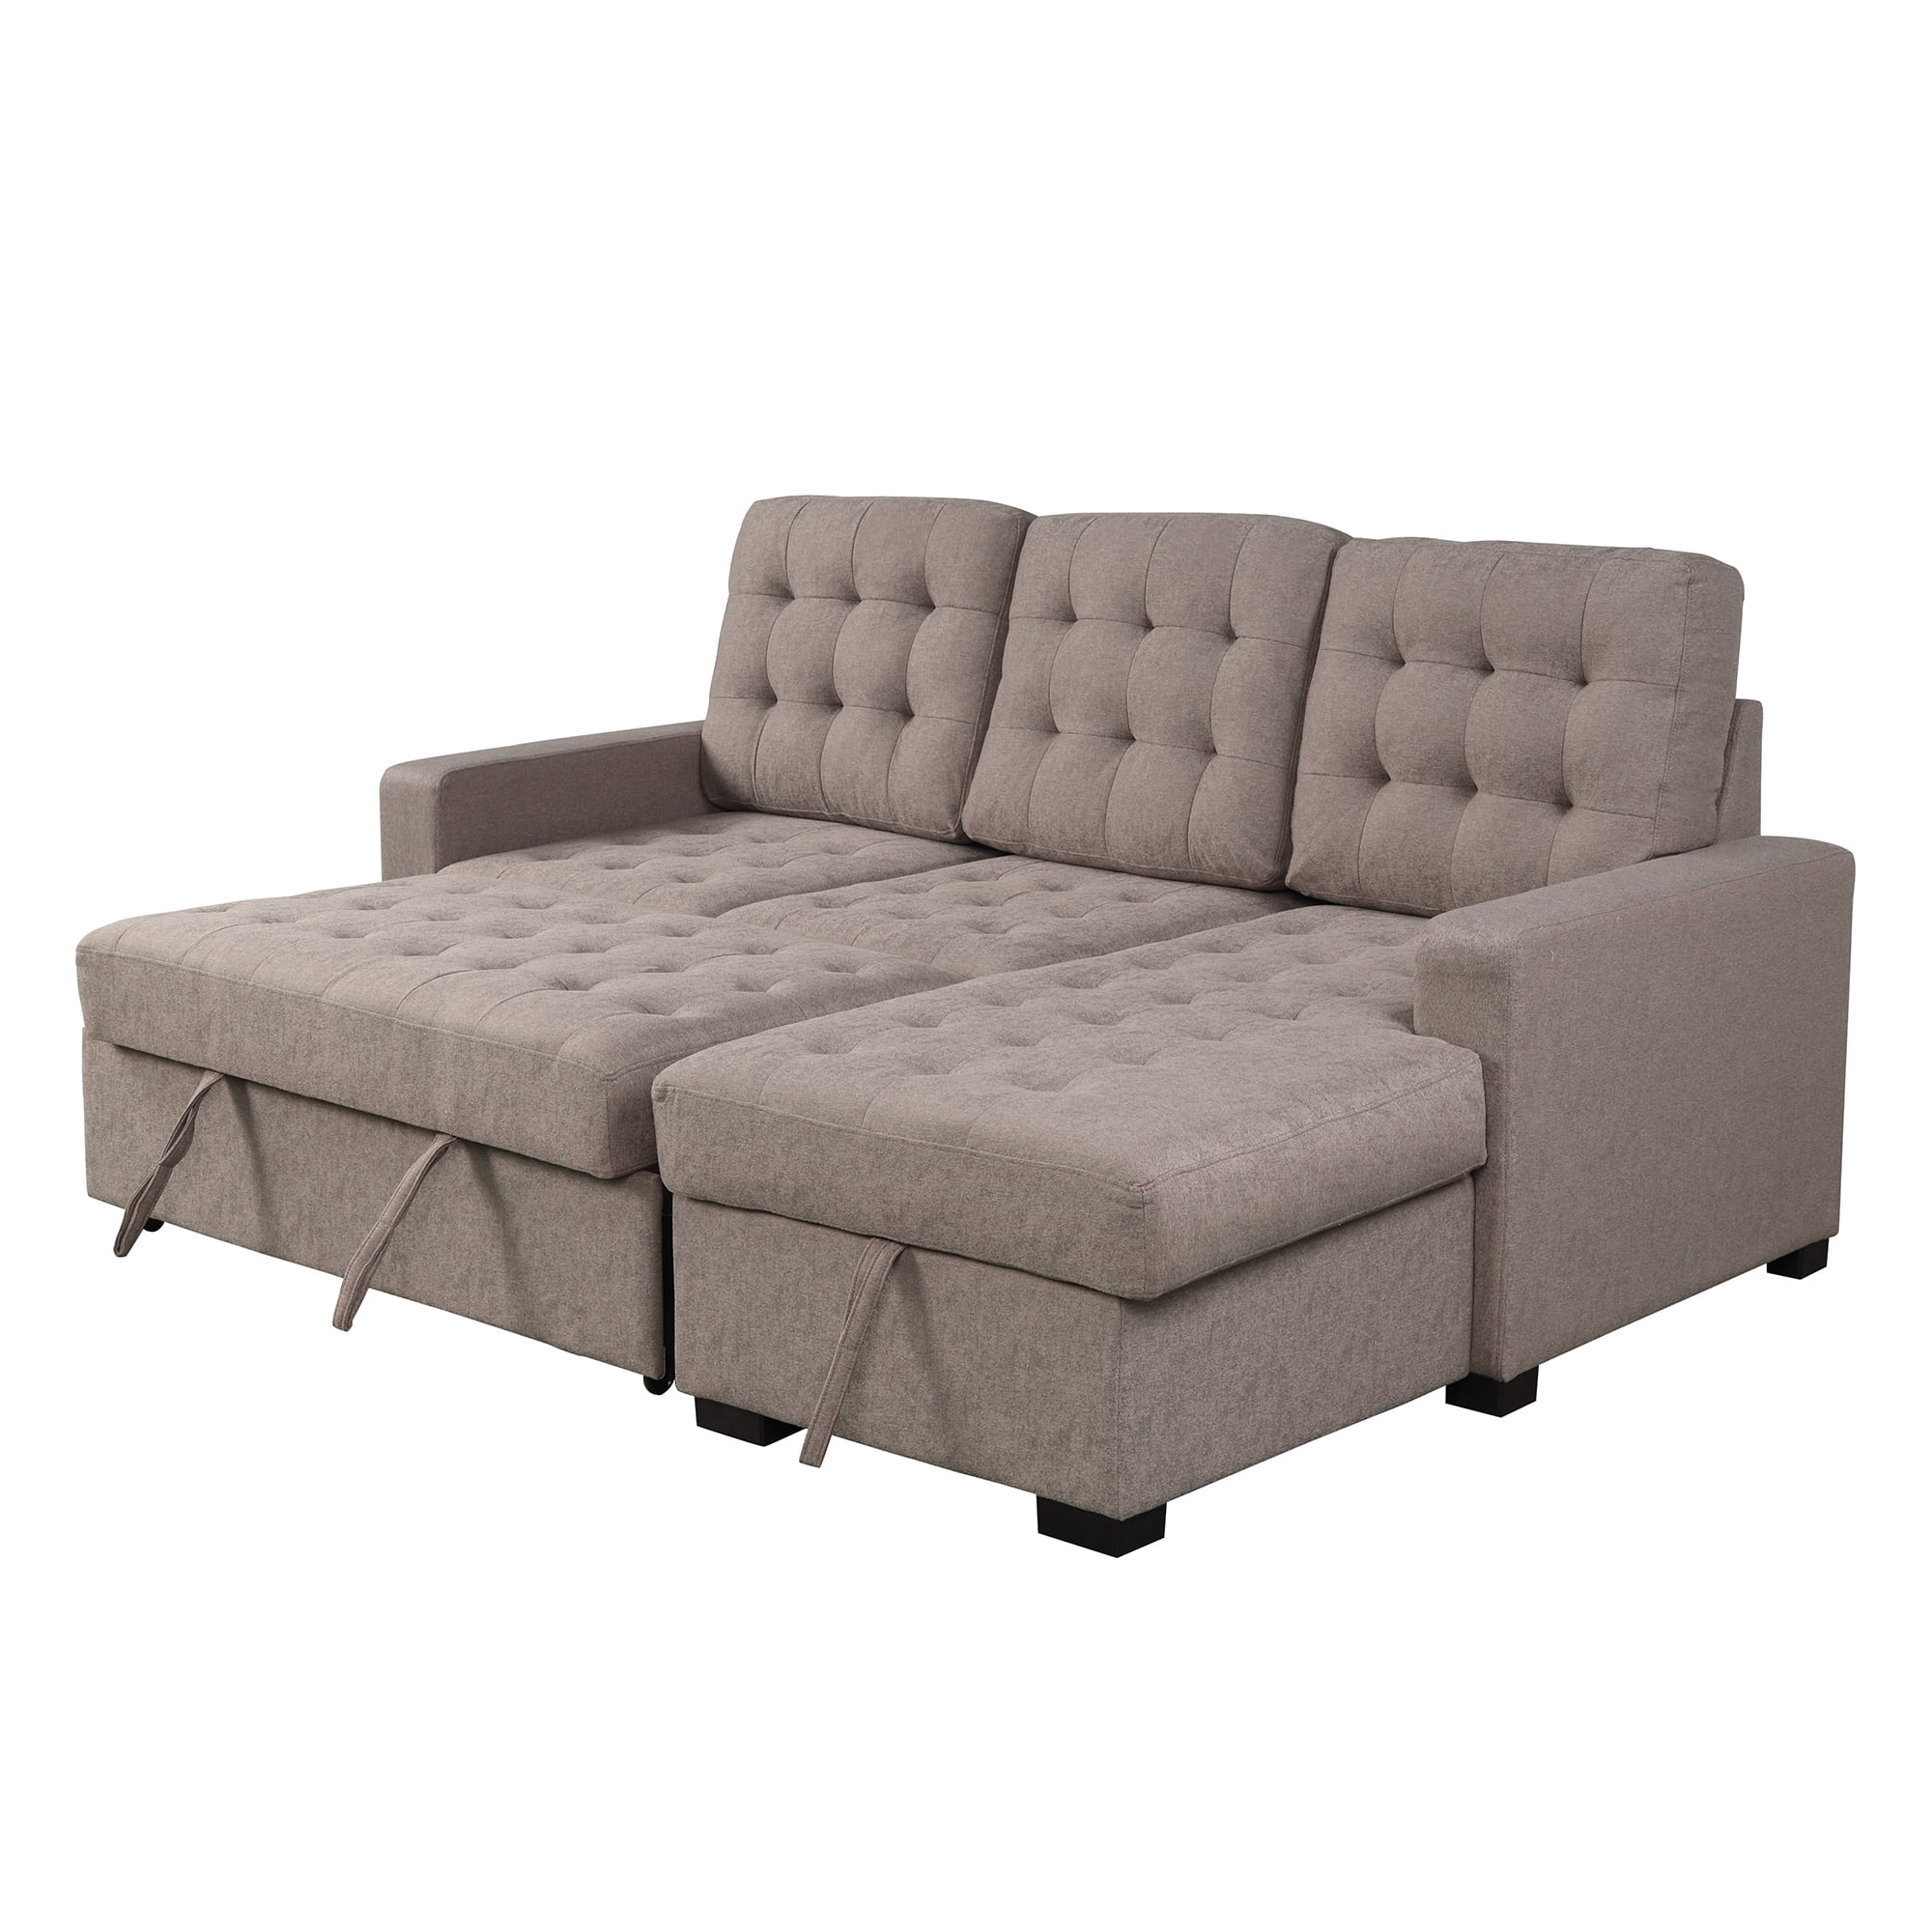 Sectional Couch, 96"x61"x46" Modern Sofa Sets with Chaise